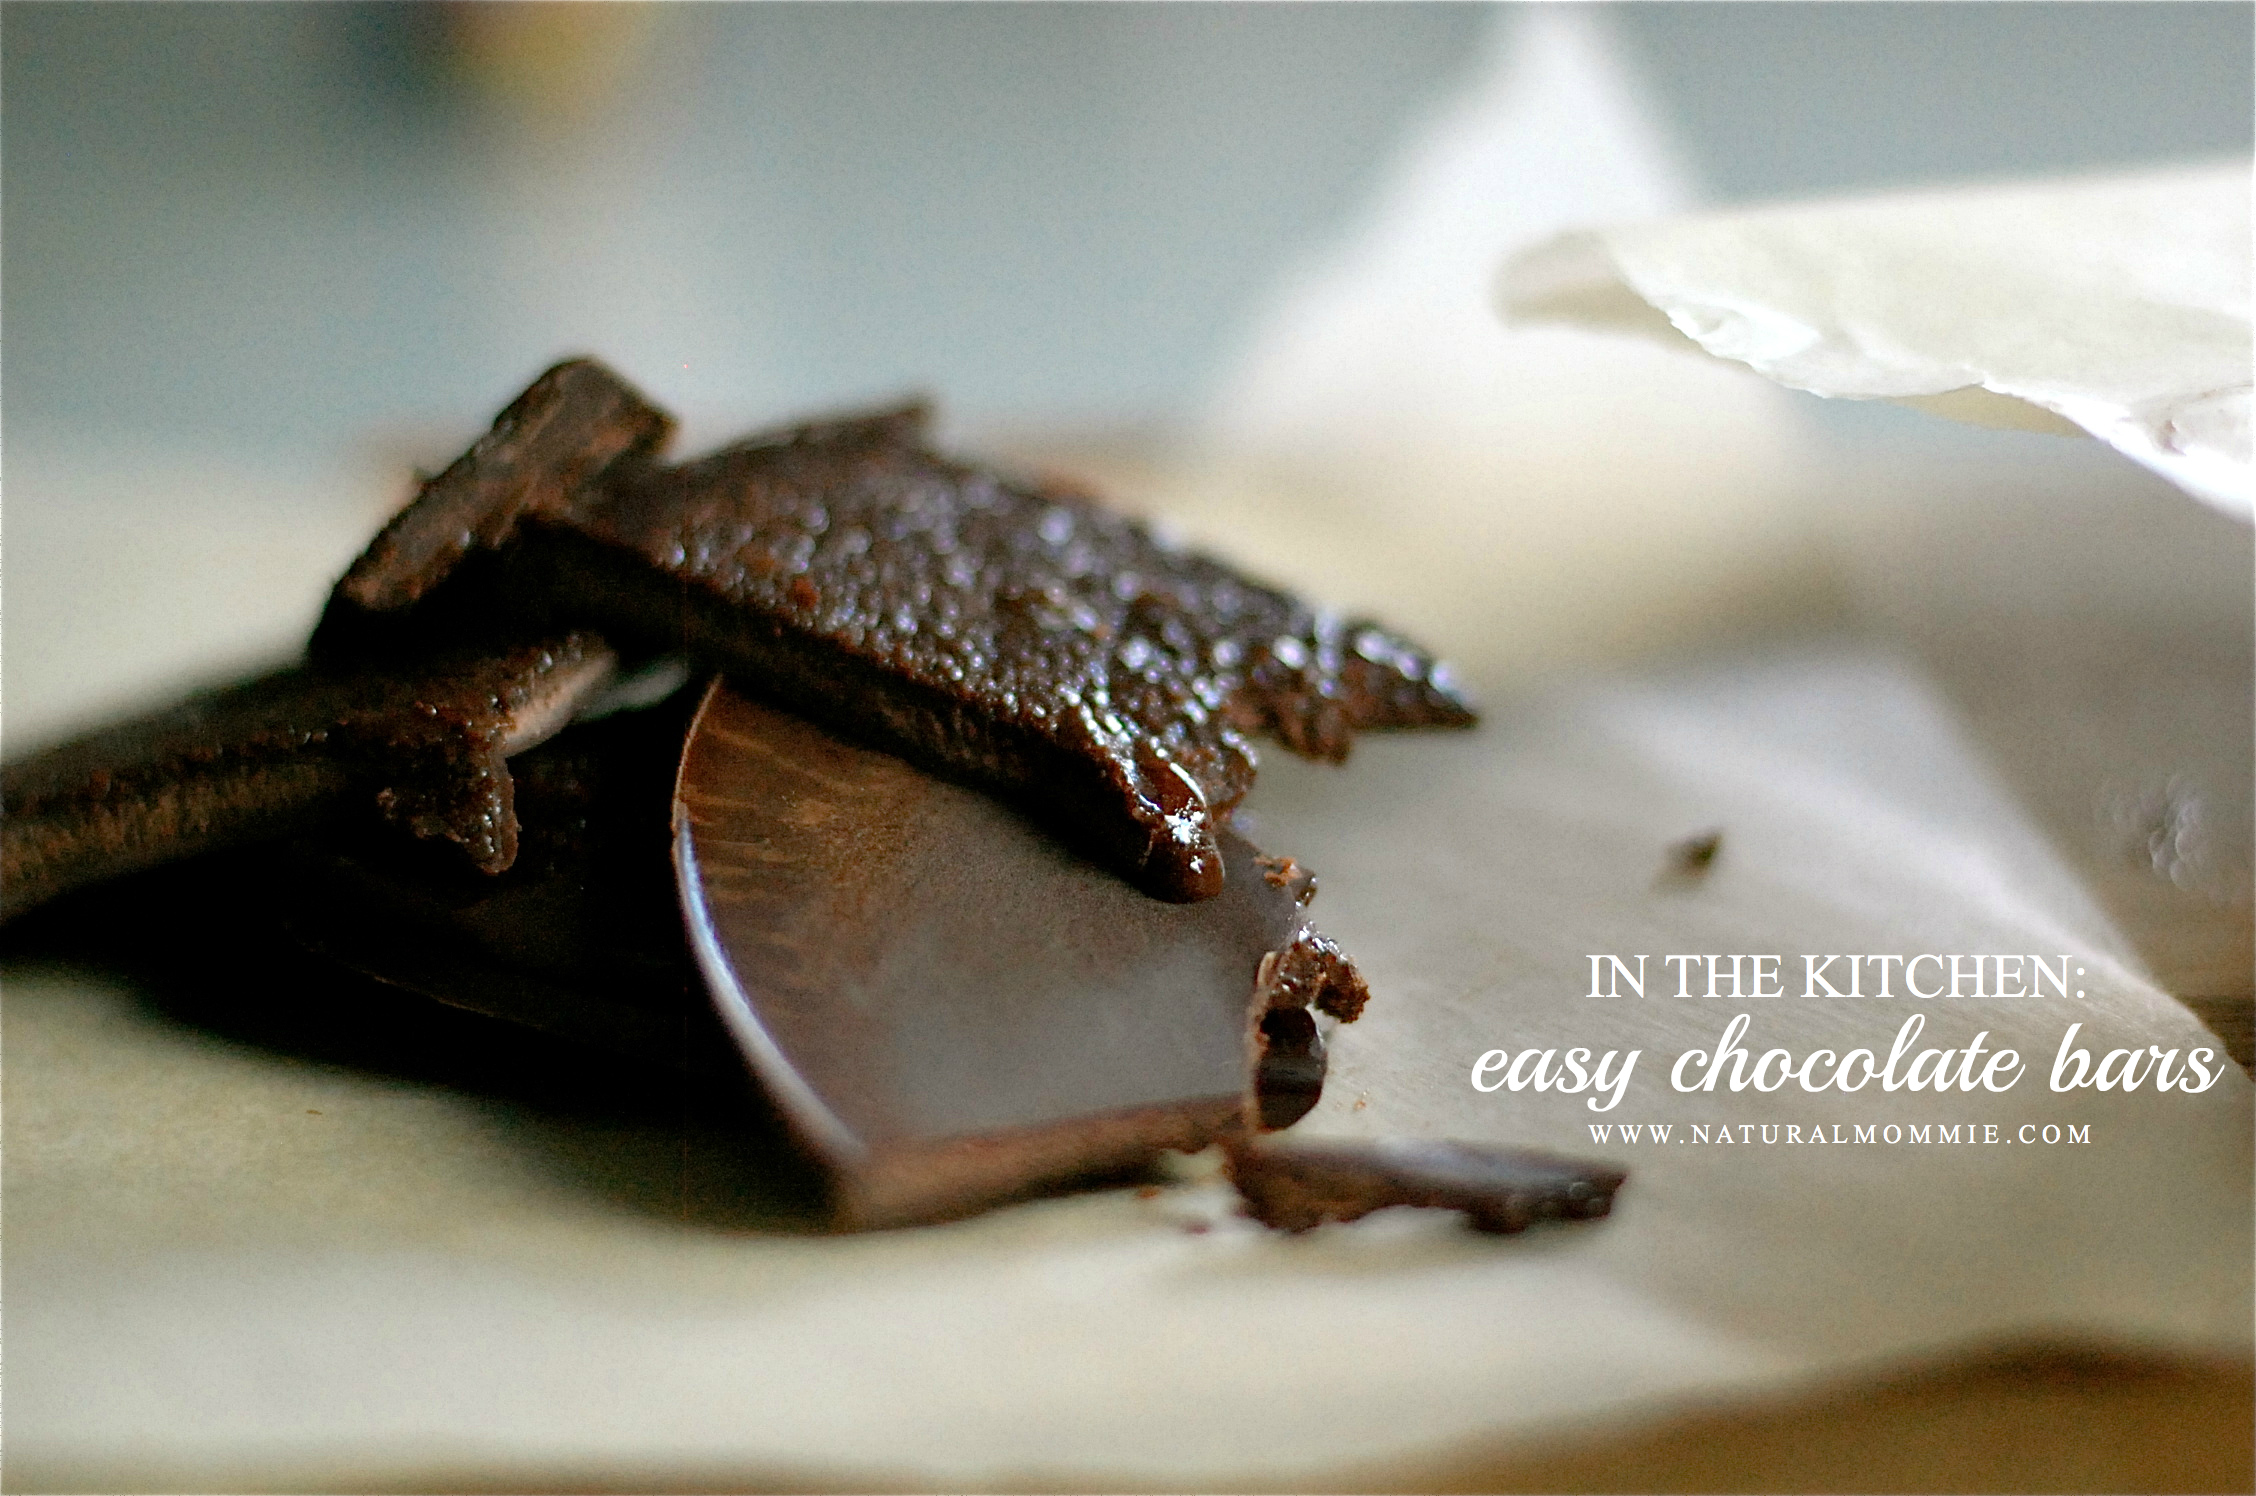 in the kitchen: make your own healthy delicious chocolate bars in 5 minutes! (with just 5 ingredients!)